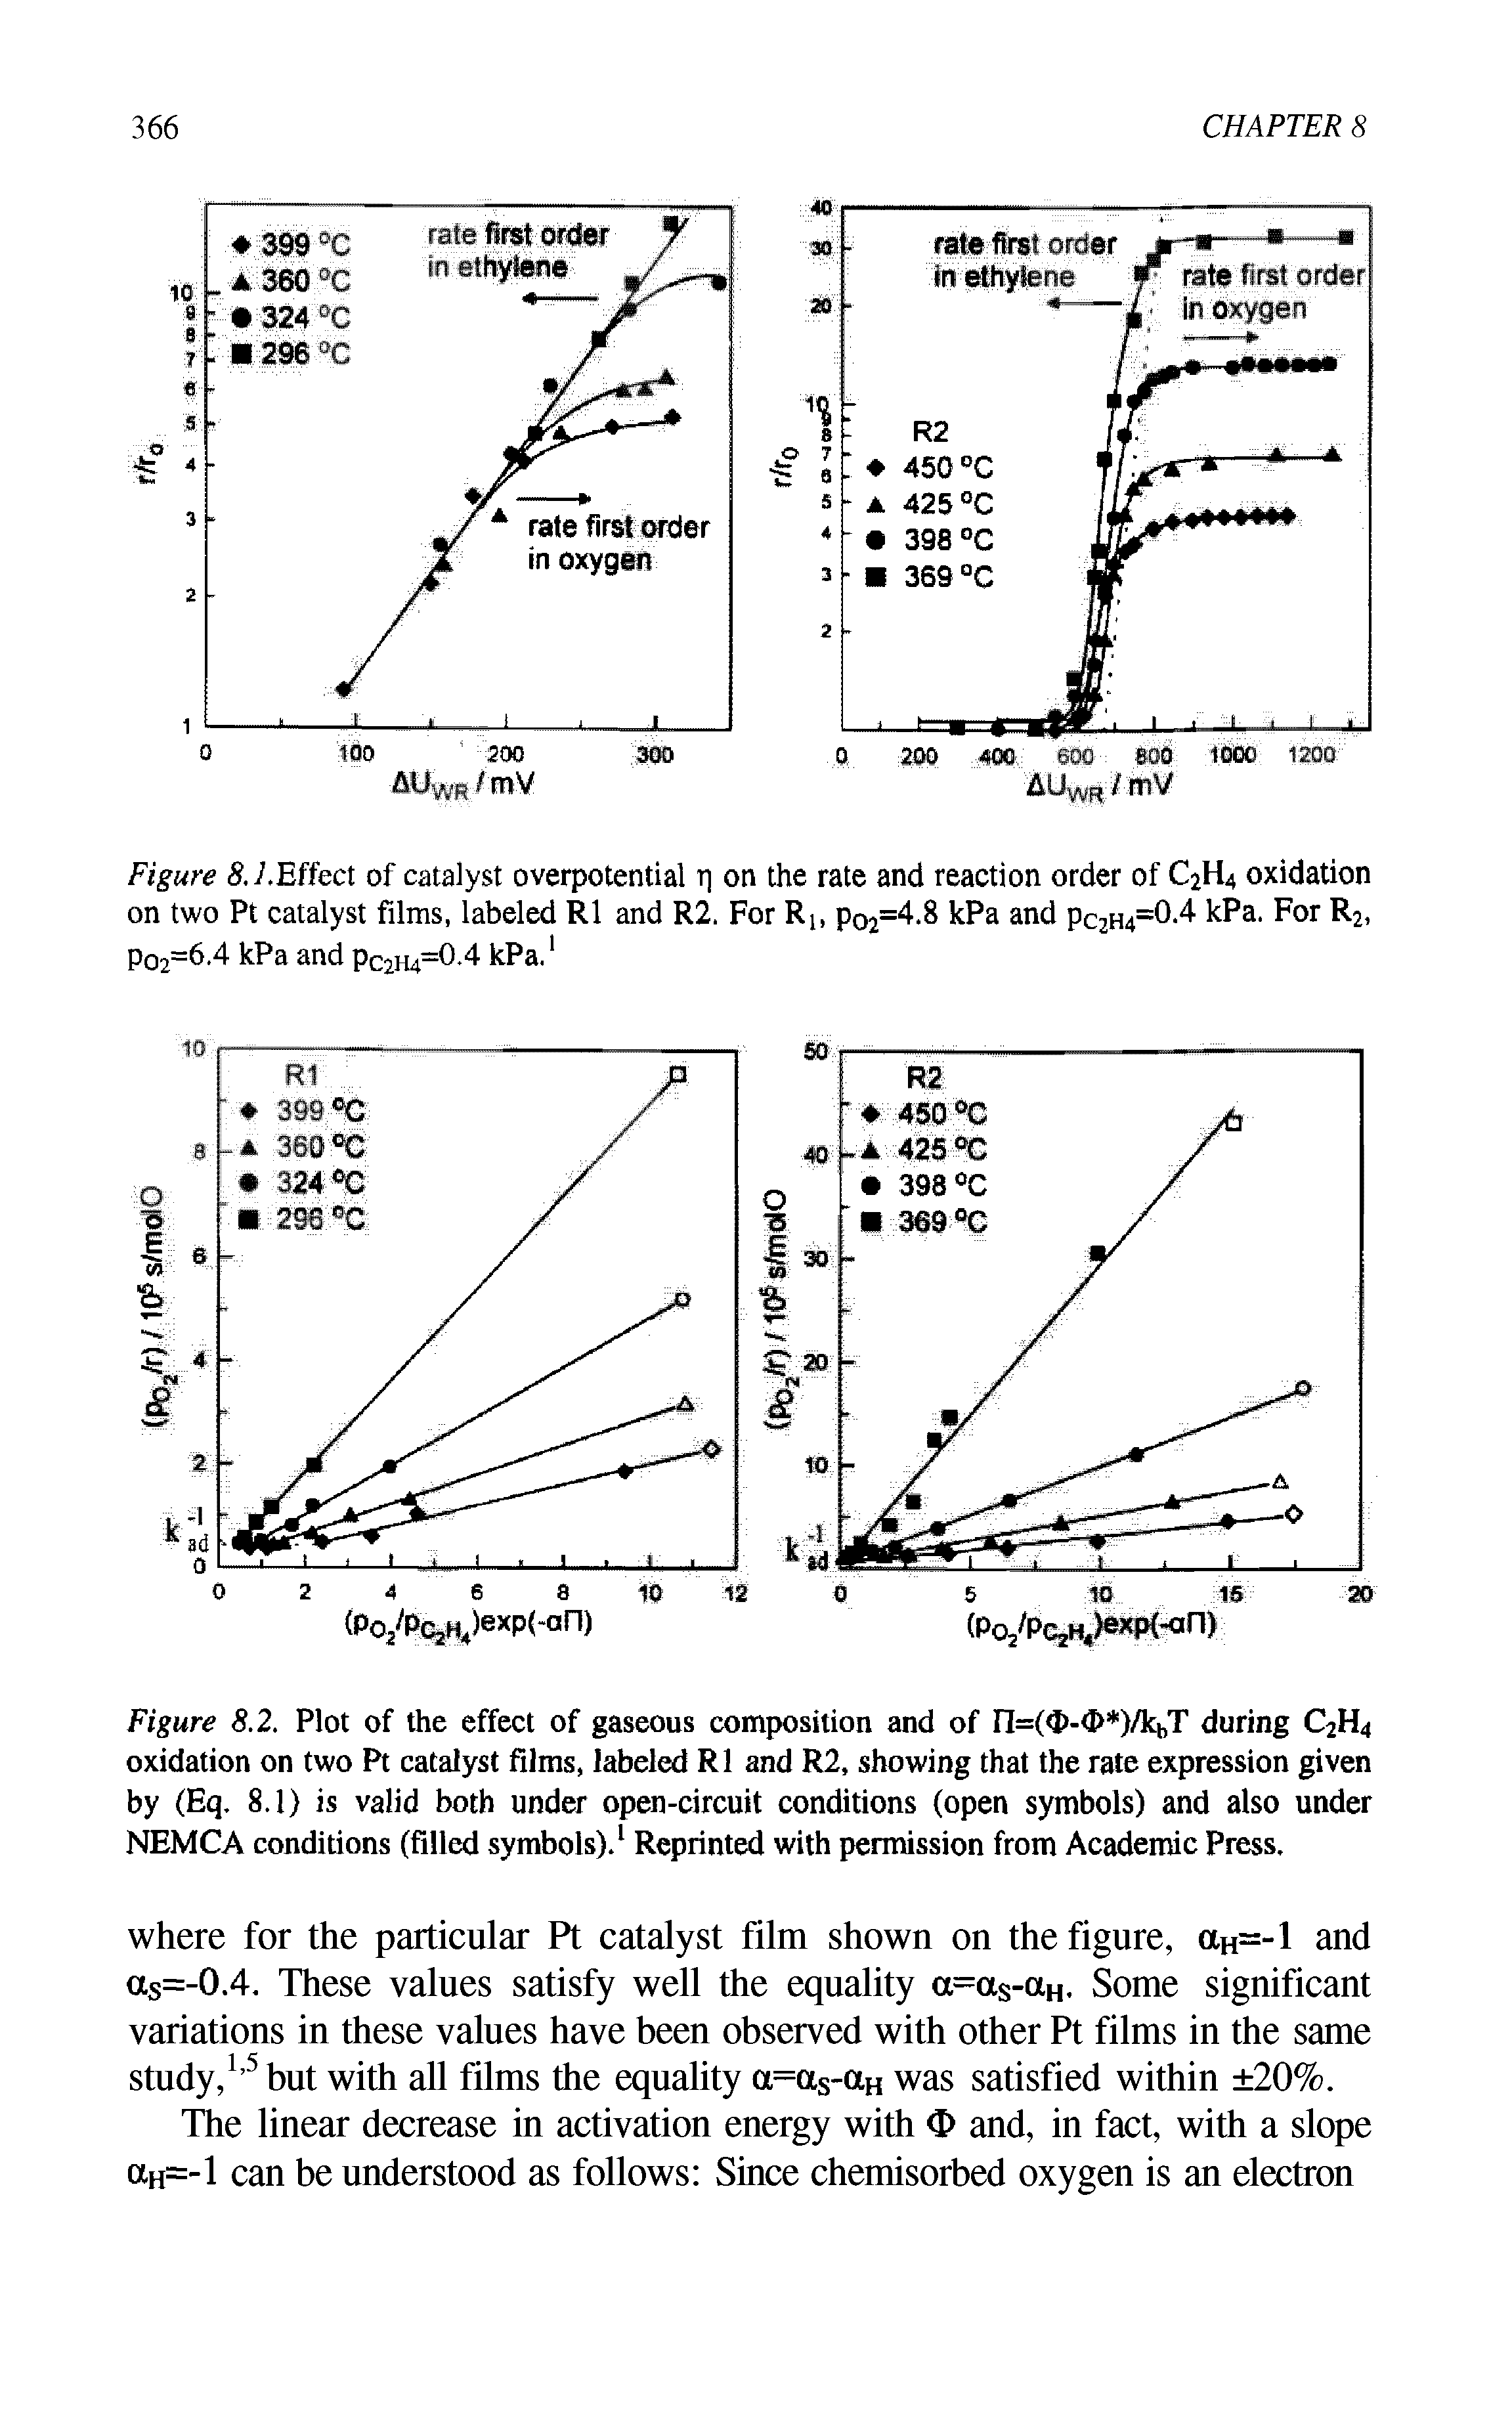 Figure 7.Effect of catalyst overpotential r on the rate and reaction order of C2H4 oxidation on two Pt catalyst films, labeled R1 and R2. For Rb p02=4.8 kPa and Pc2H4=0-4 kPa. For R2, Po2=6.4 kPa and Pc2H4=0 4 kPa.1...